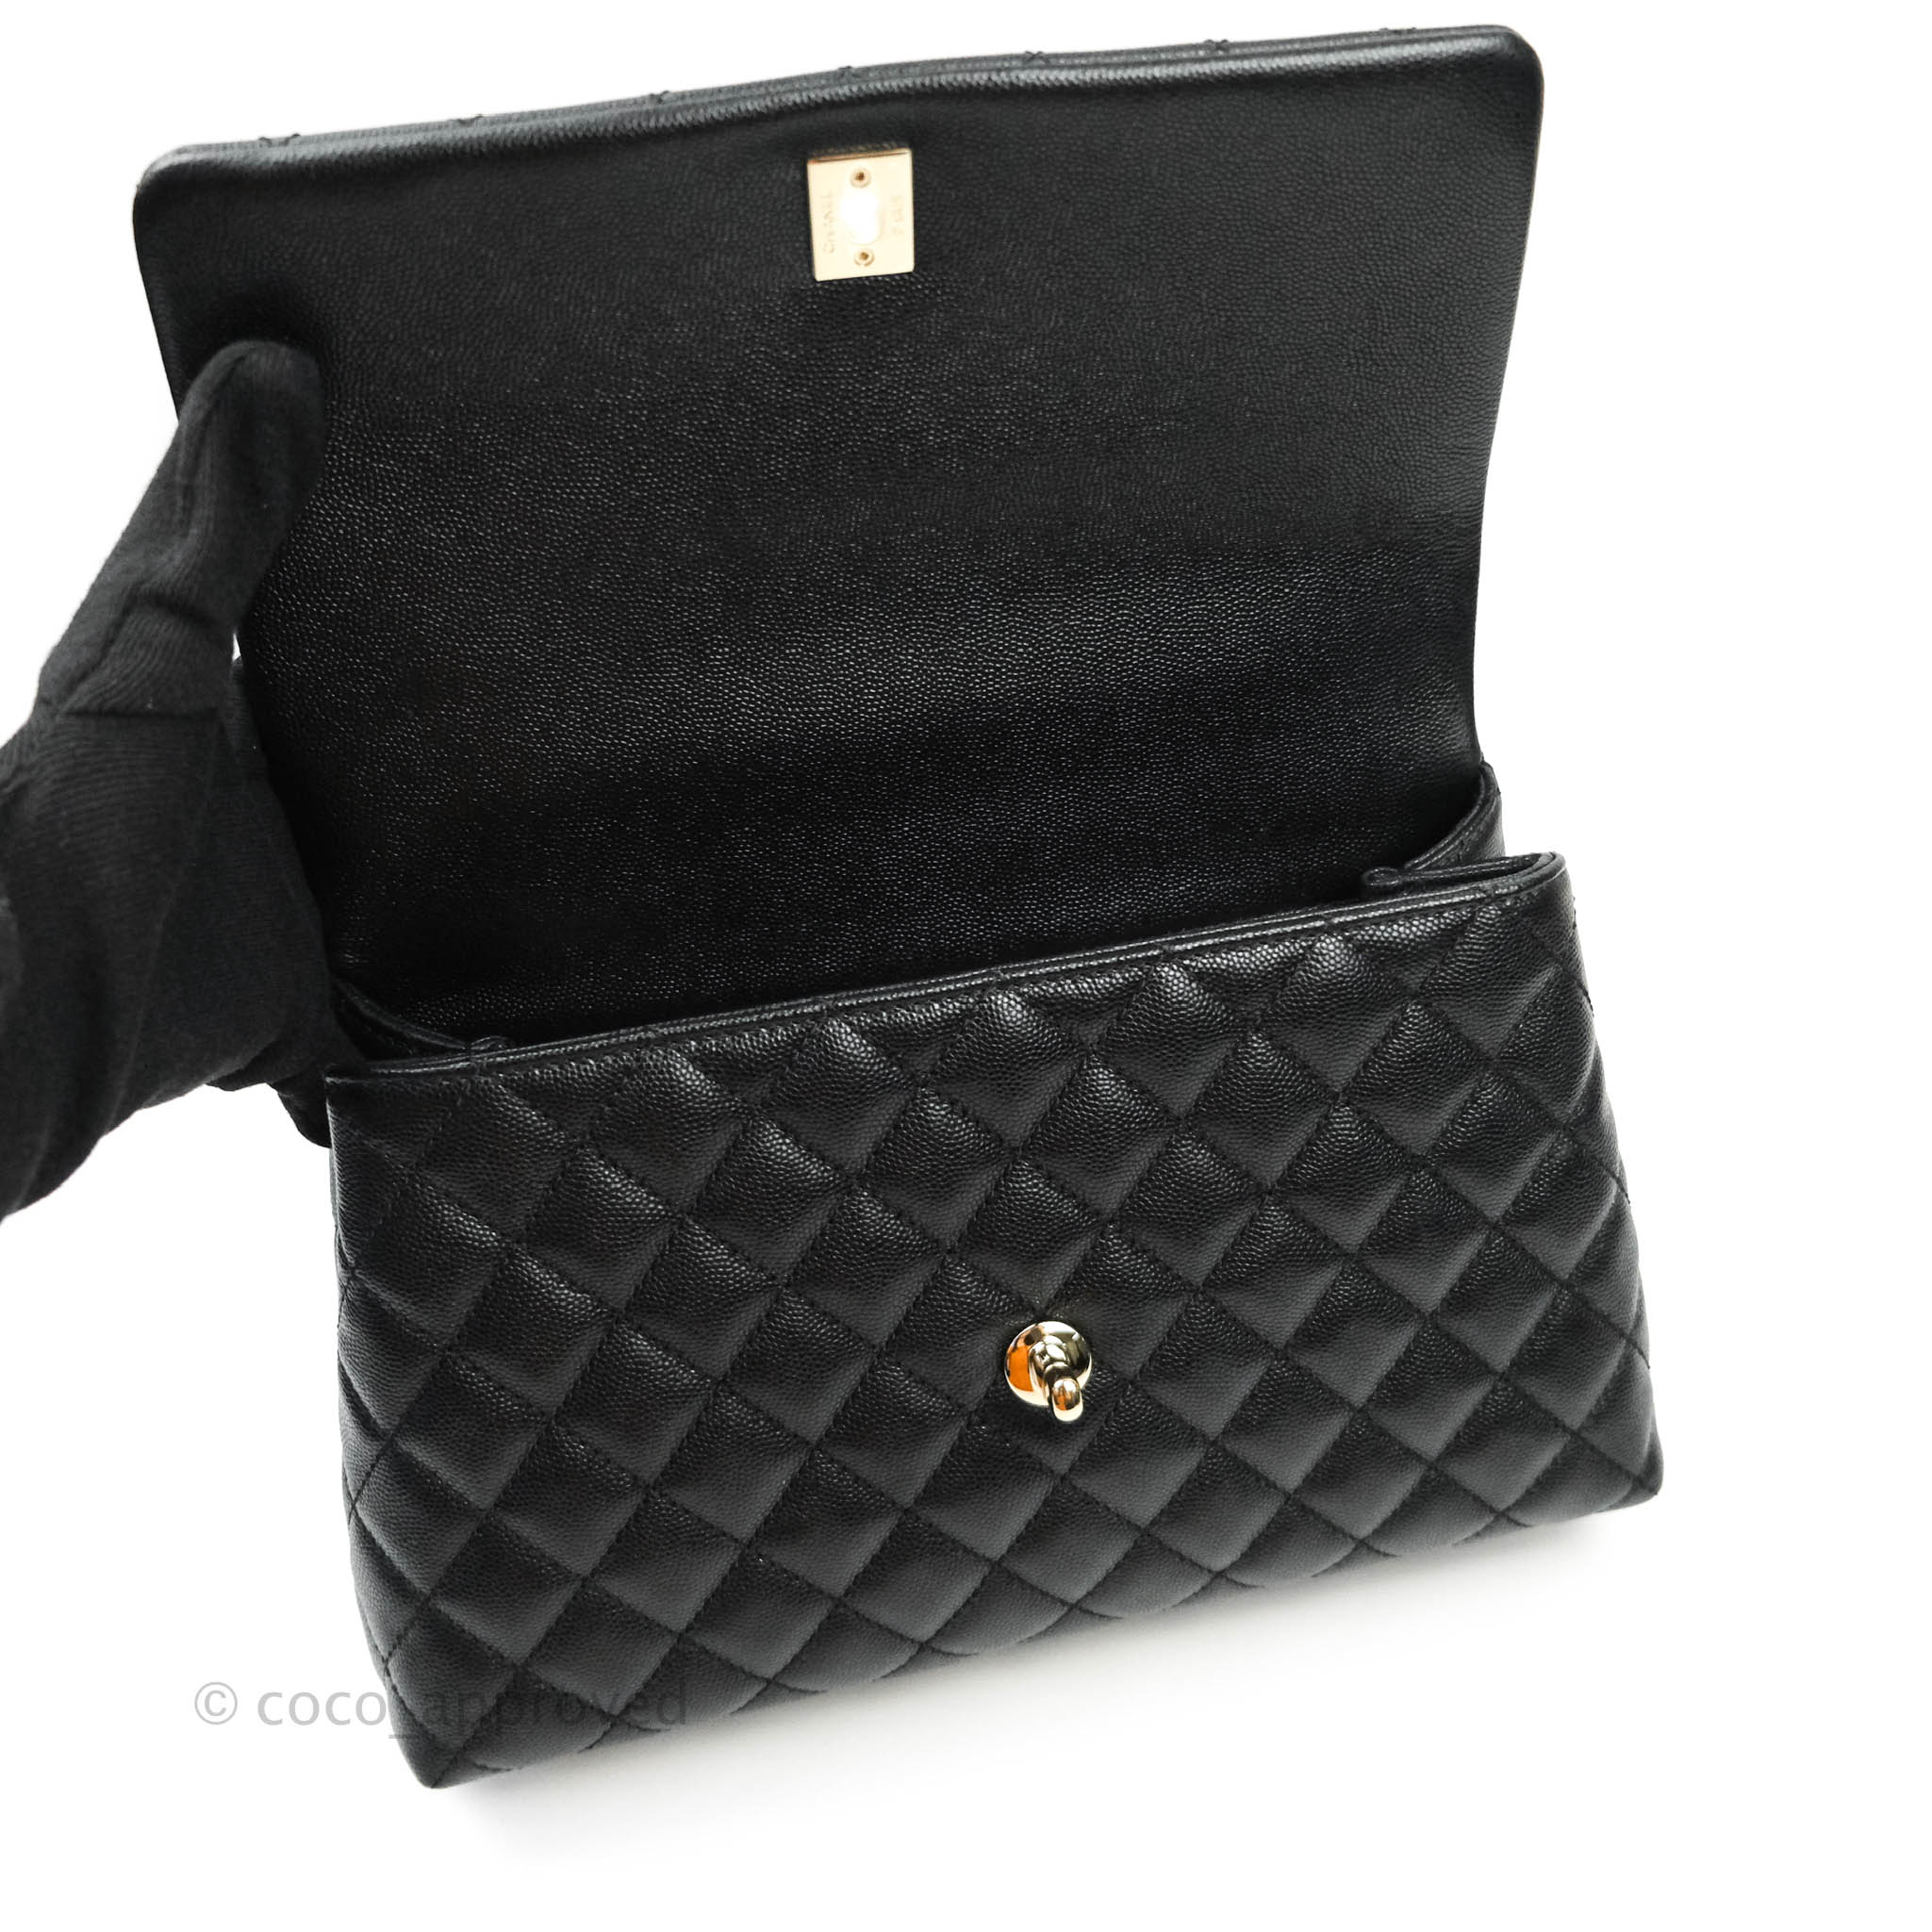 Chanel Black Caviar Lizard Coco Handle Small Flap Bag For Sale at